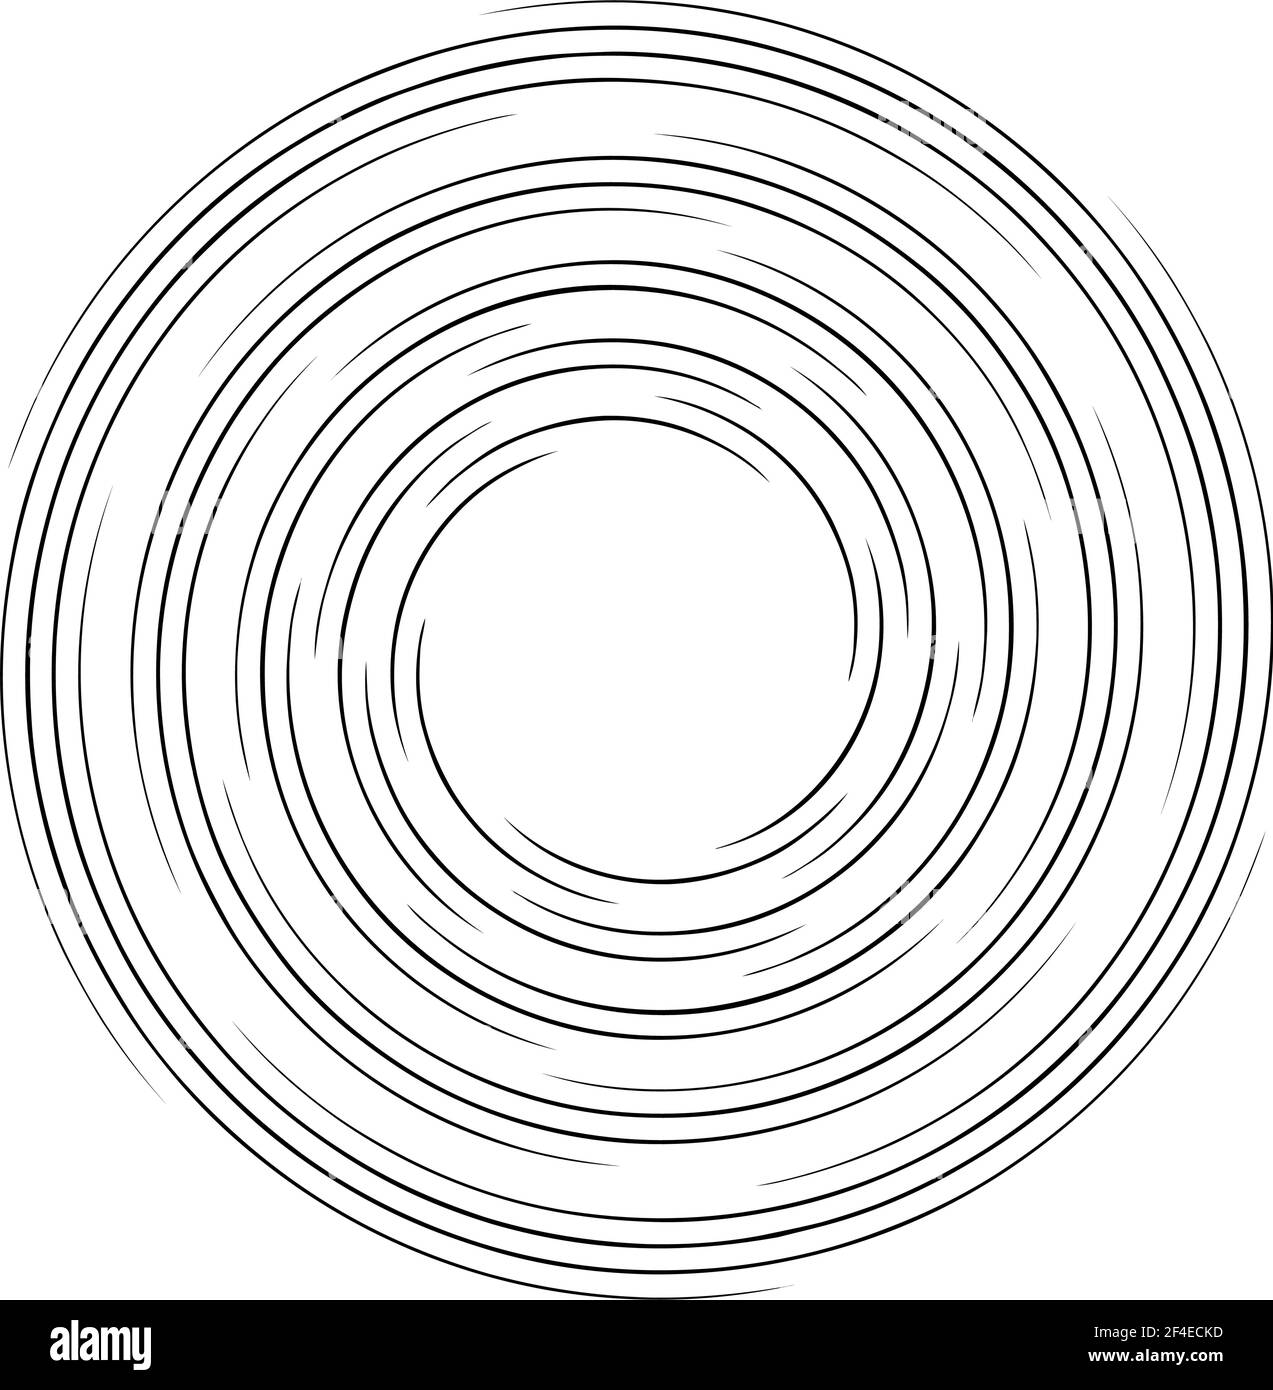 Spiral, twirl, whirlpool element vector illustration. Cochlear, helix, and volute Stock Vector